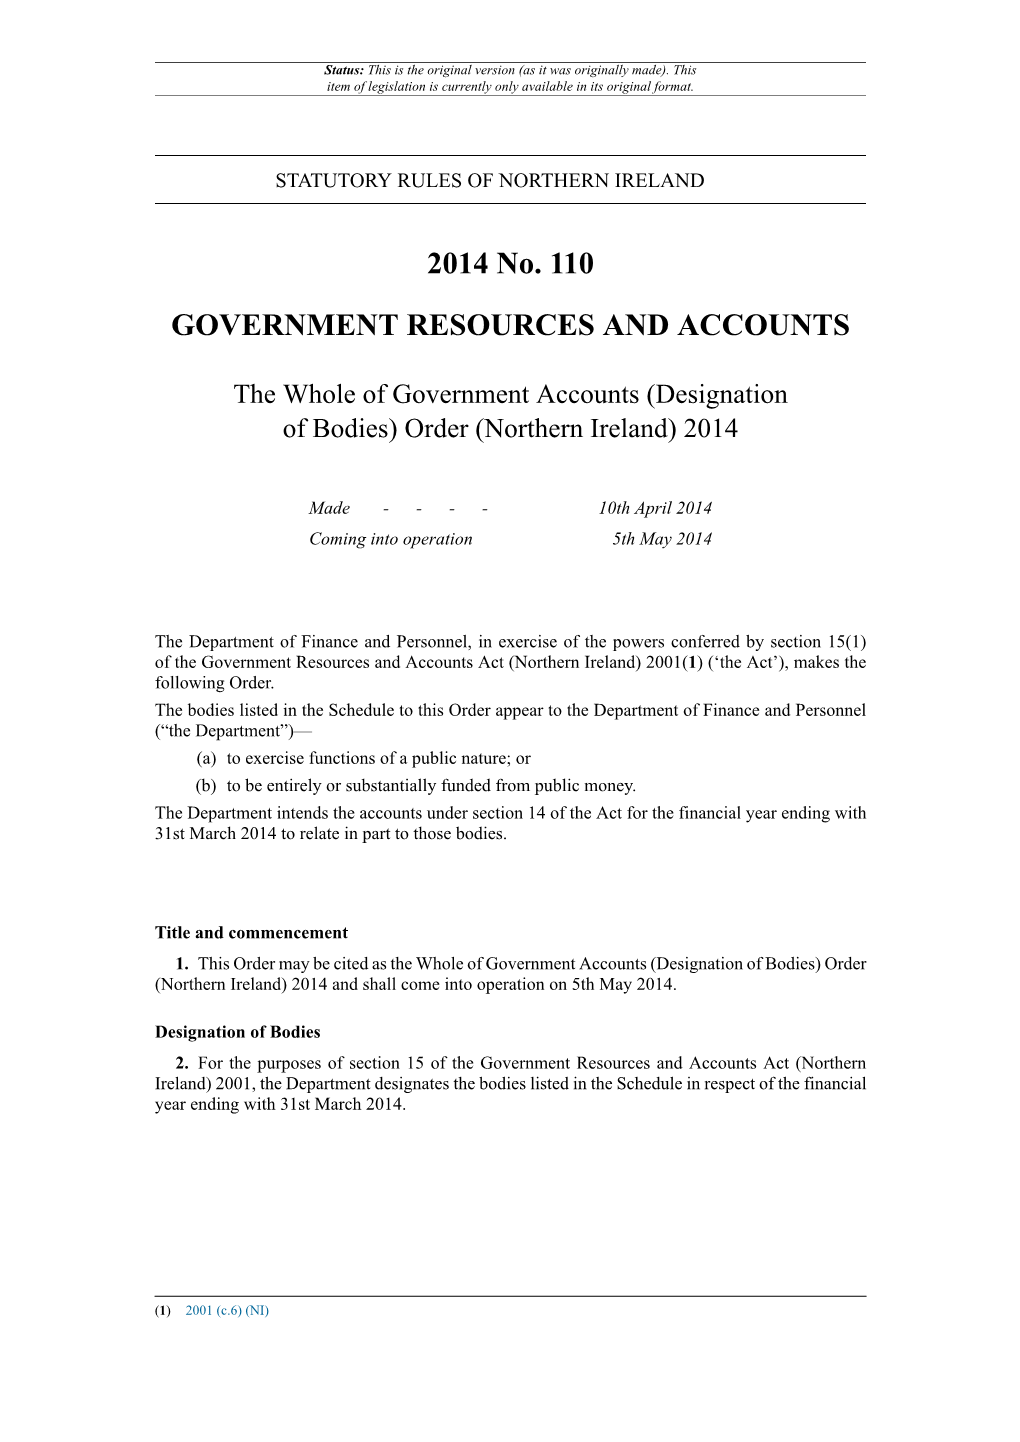 The Whole of Government Accounts (Designation of Bodies) Order (Northern Ireland) 2014